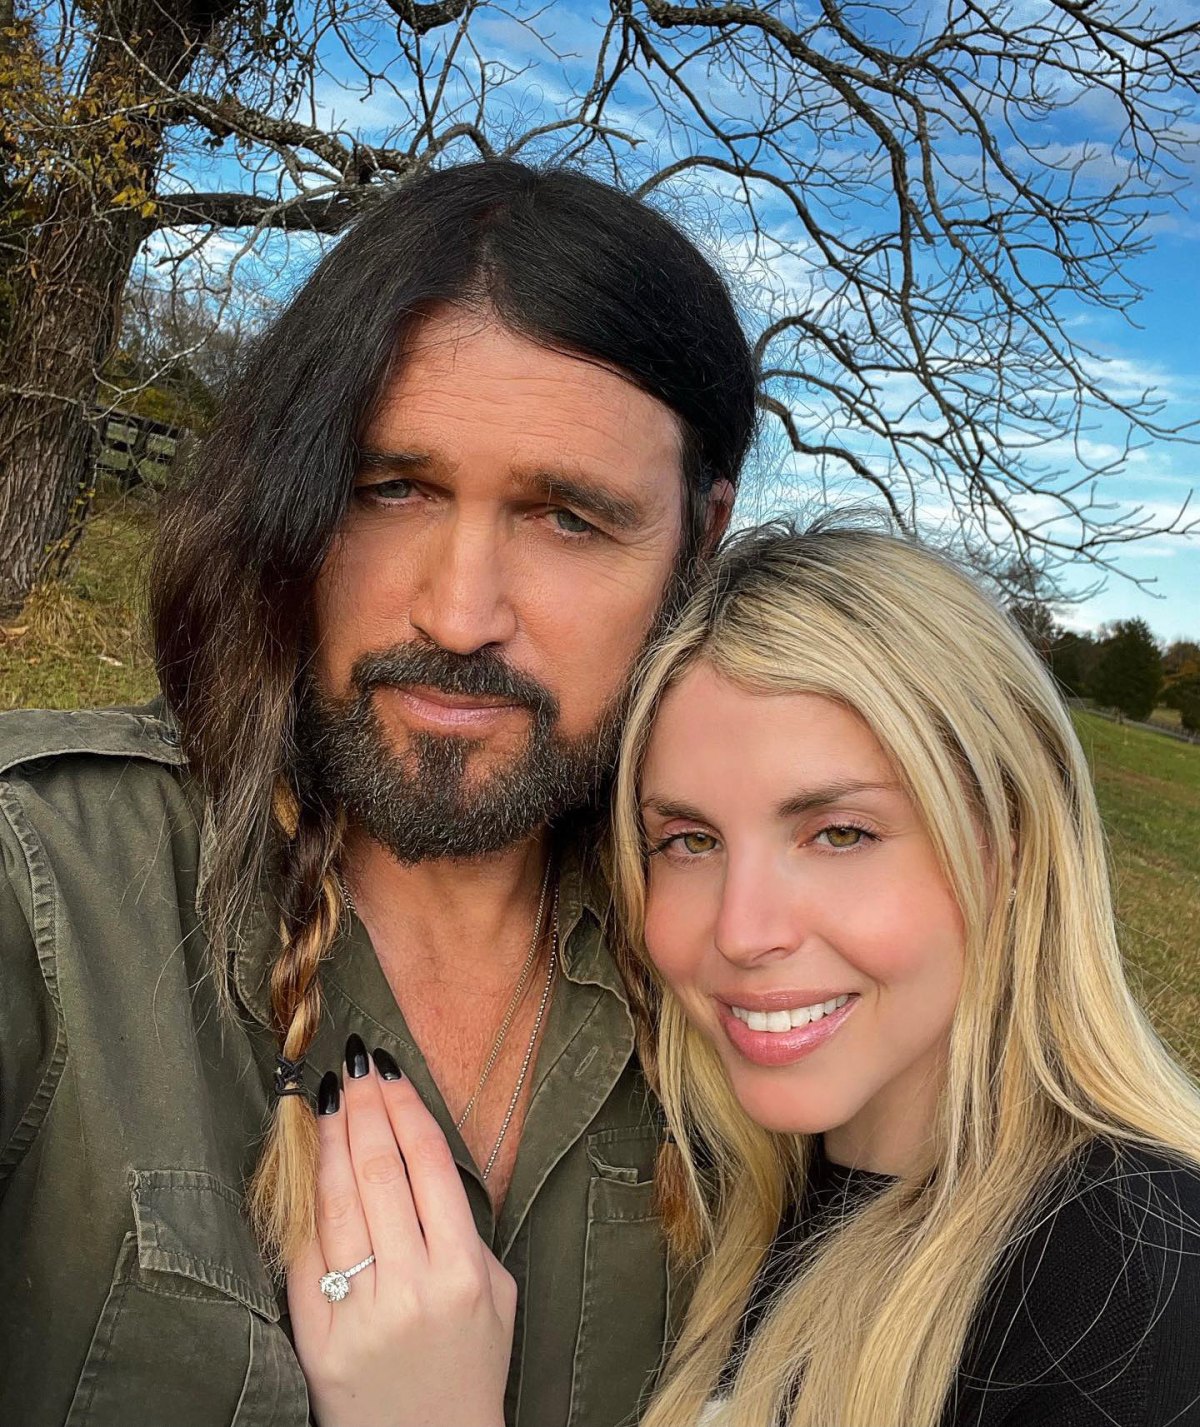 Billy Ray Cyrus shares new photo with fiancée Firerose: 'Happiness